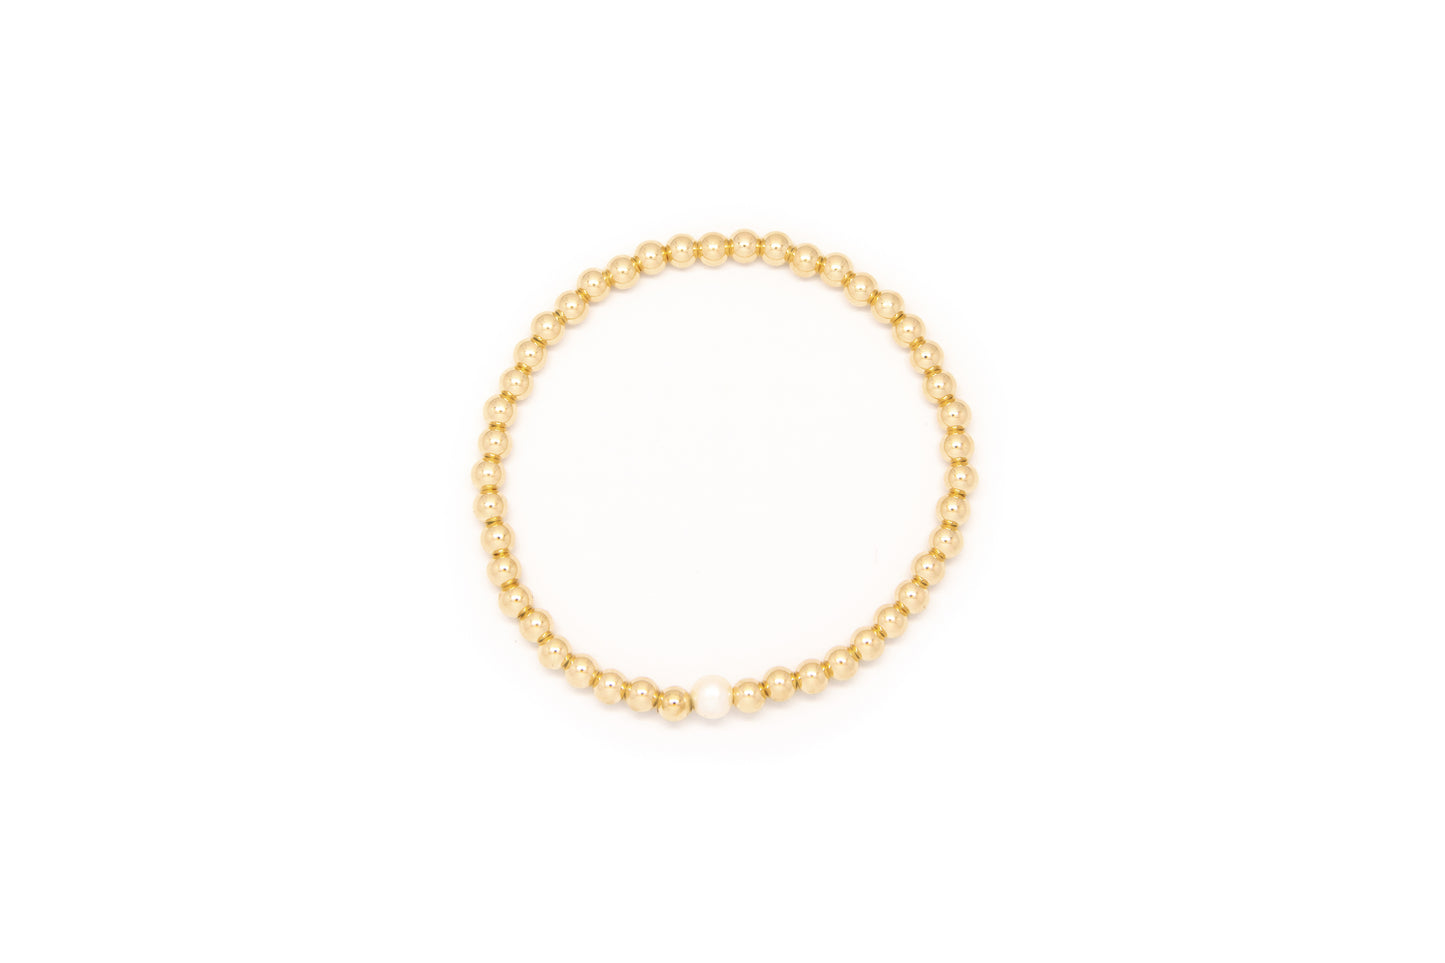 Small Gold Bracelet w/ Pearl Center